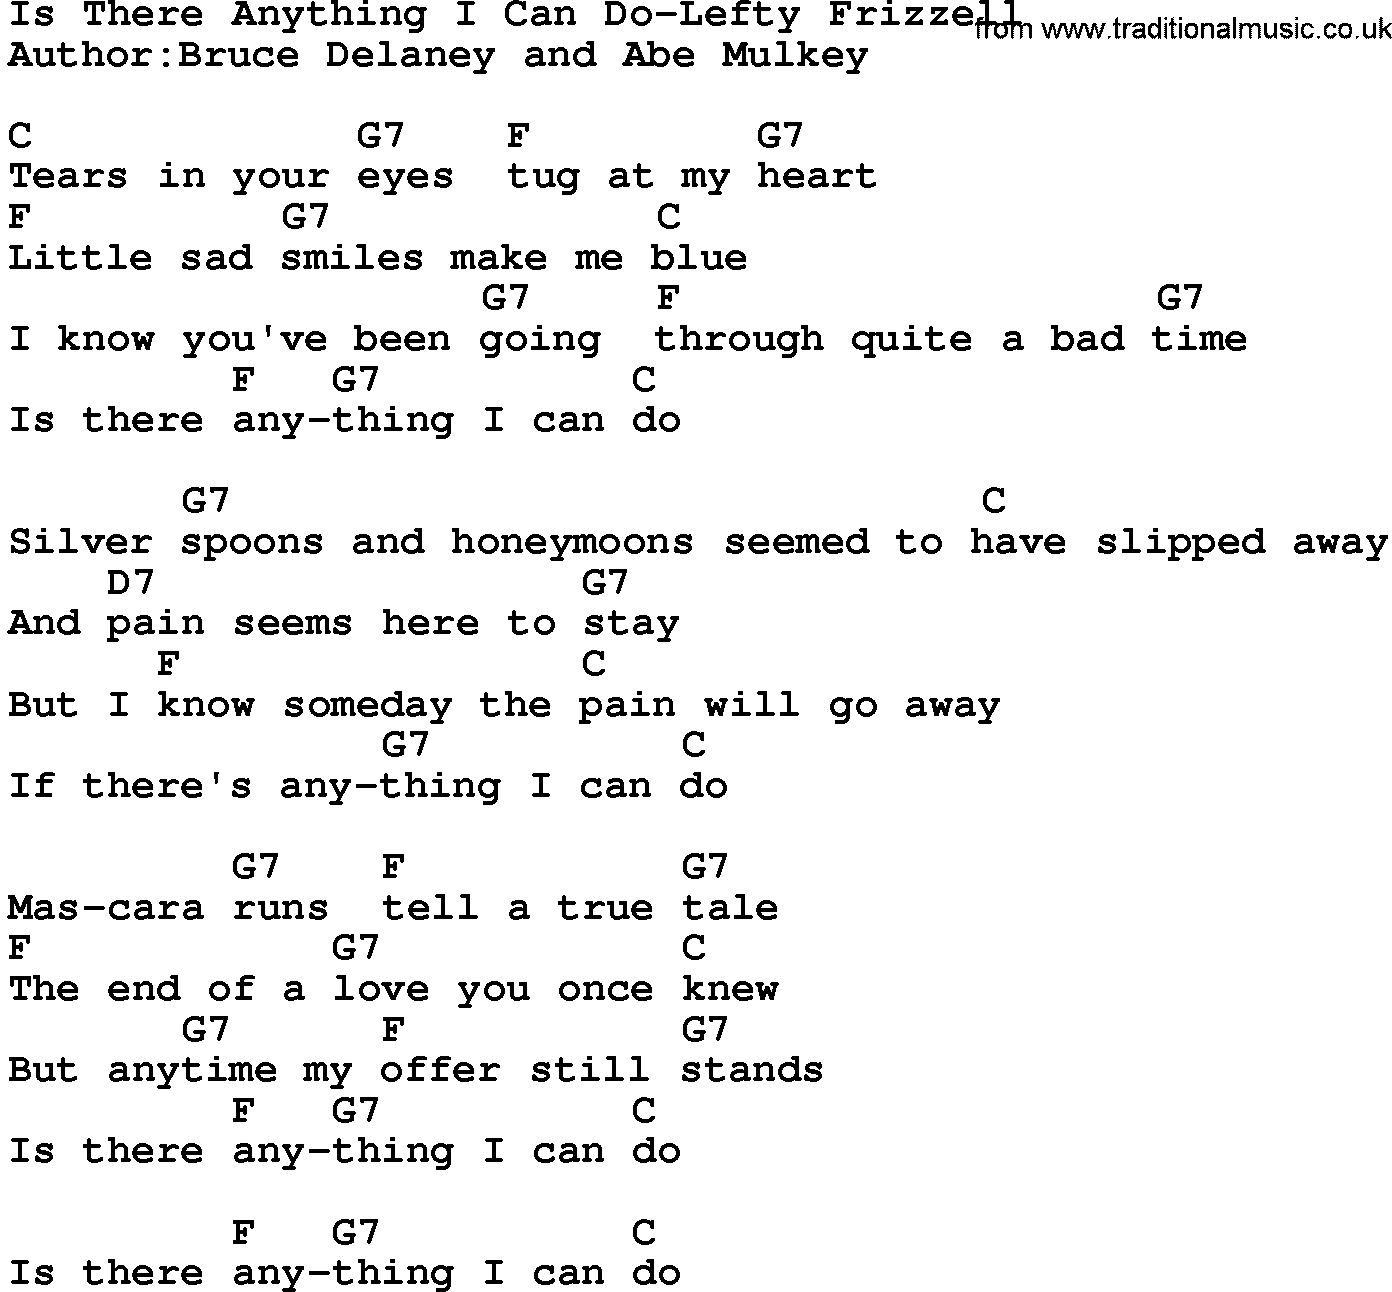 Country music song: Is There Anything I Can Do-Lefty Frizzell lyrics and chords